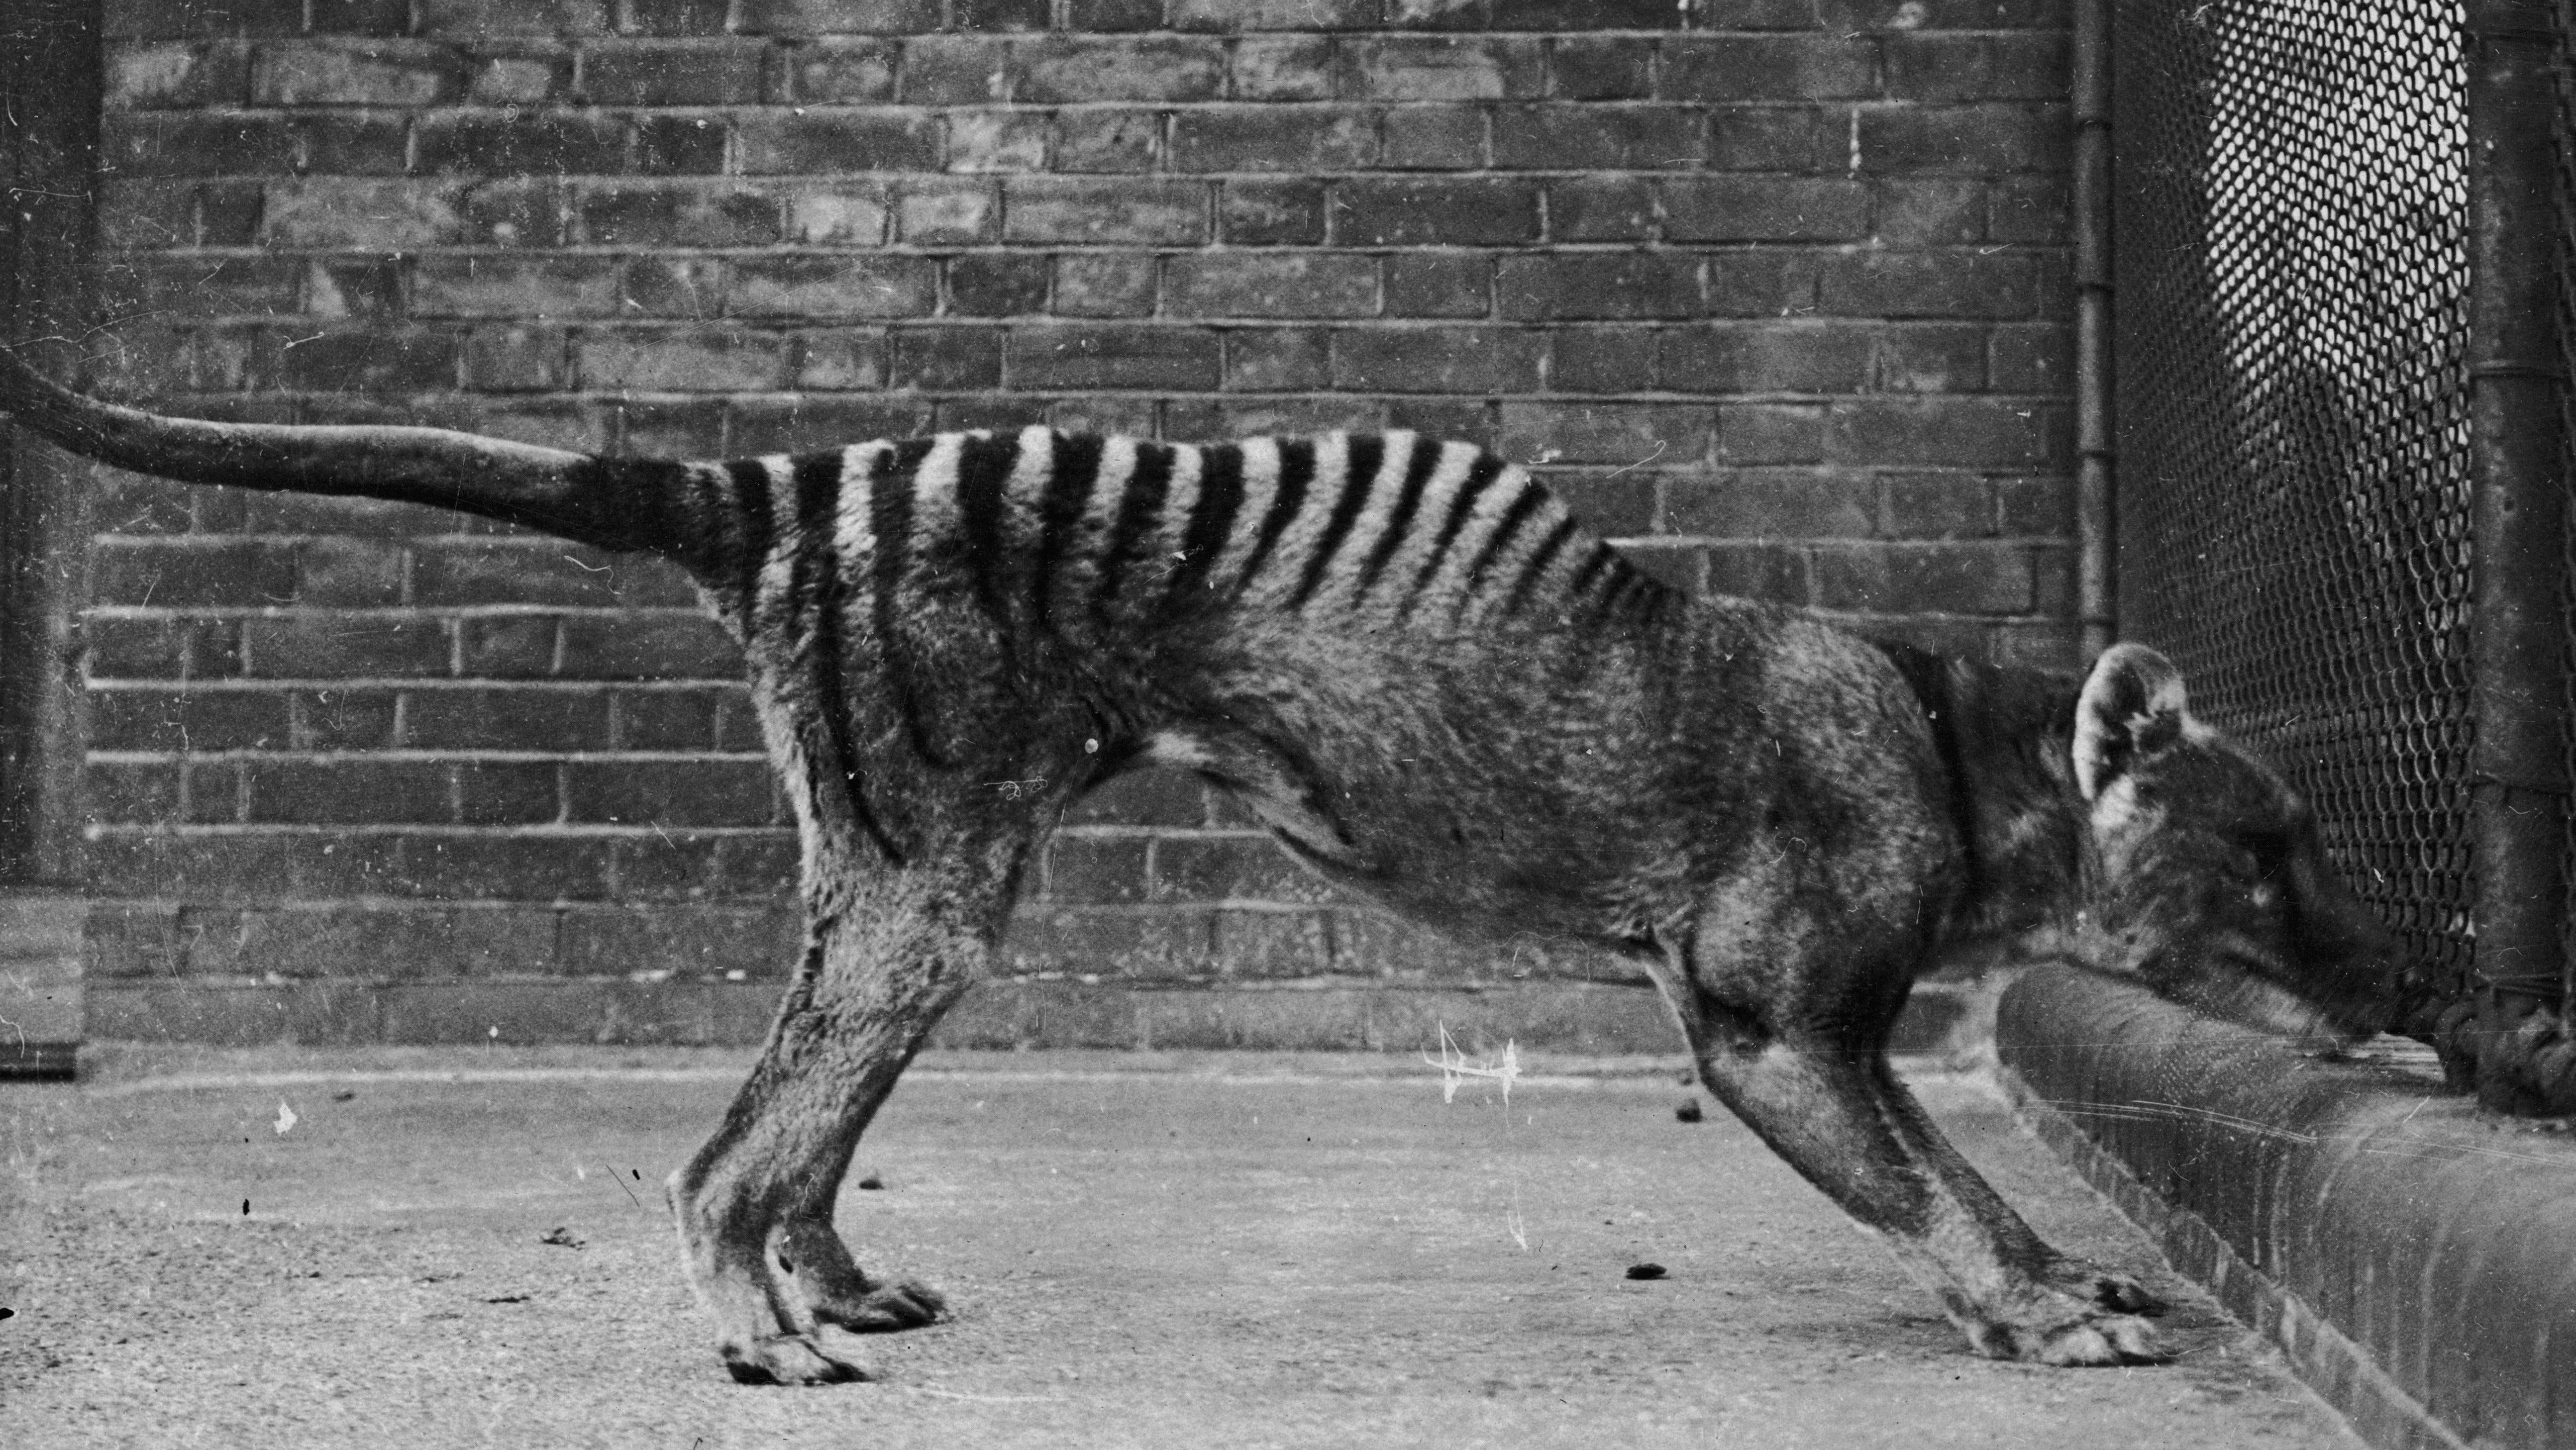 A thylacine in captivity in the 1930s. (Photo: Topical Press Agency/Hulton Archive, Getty Images)